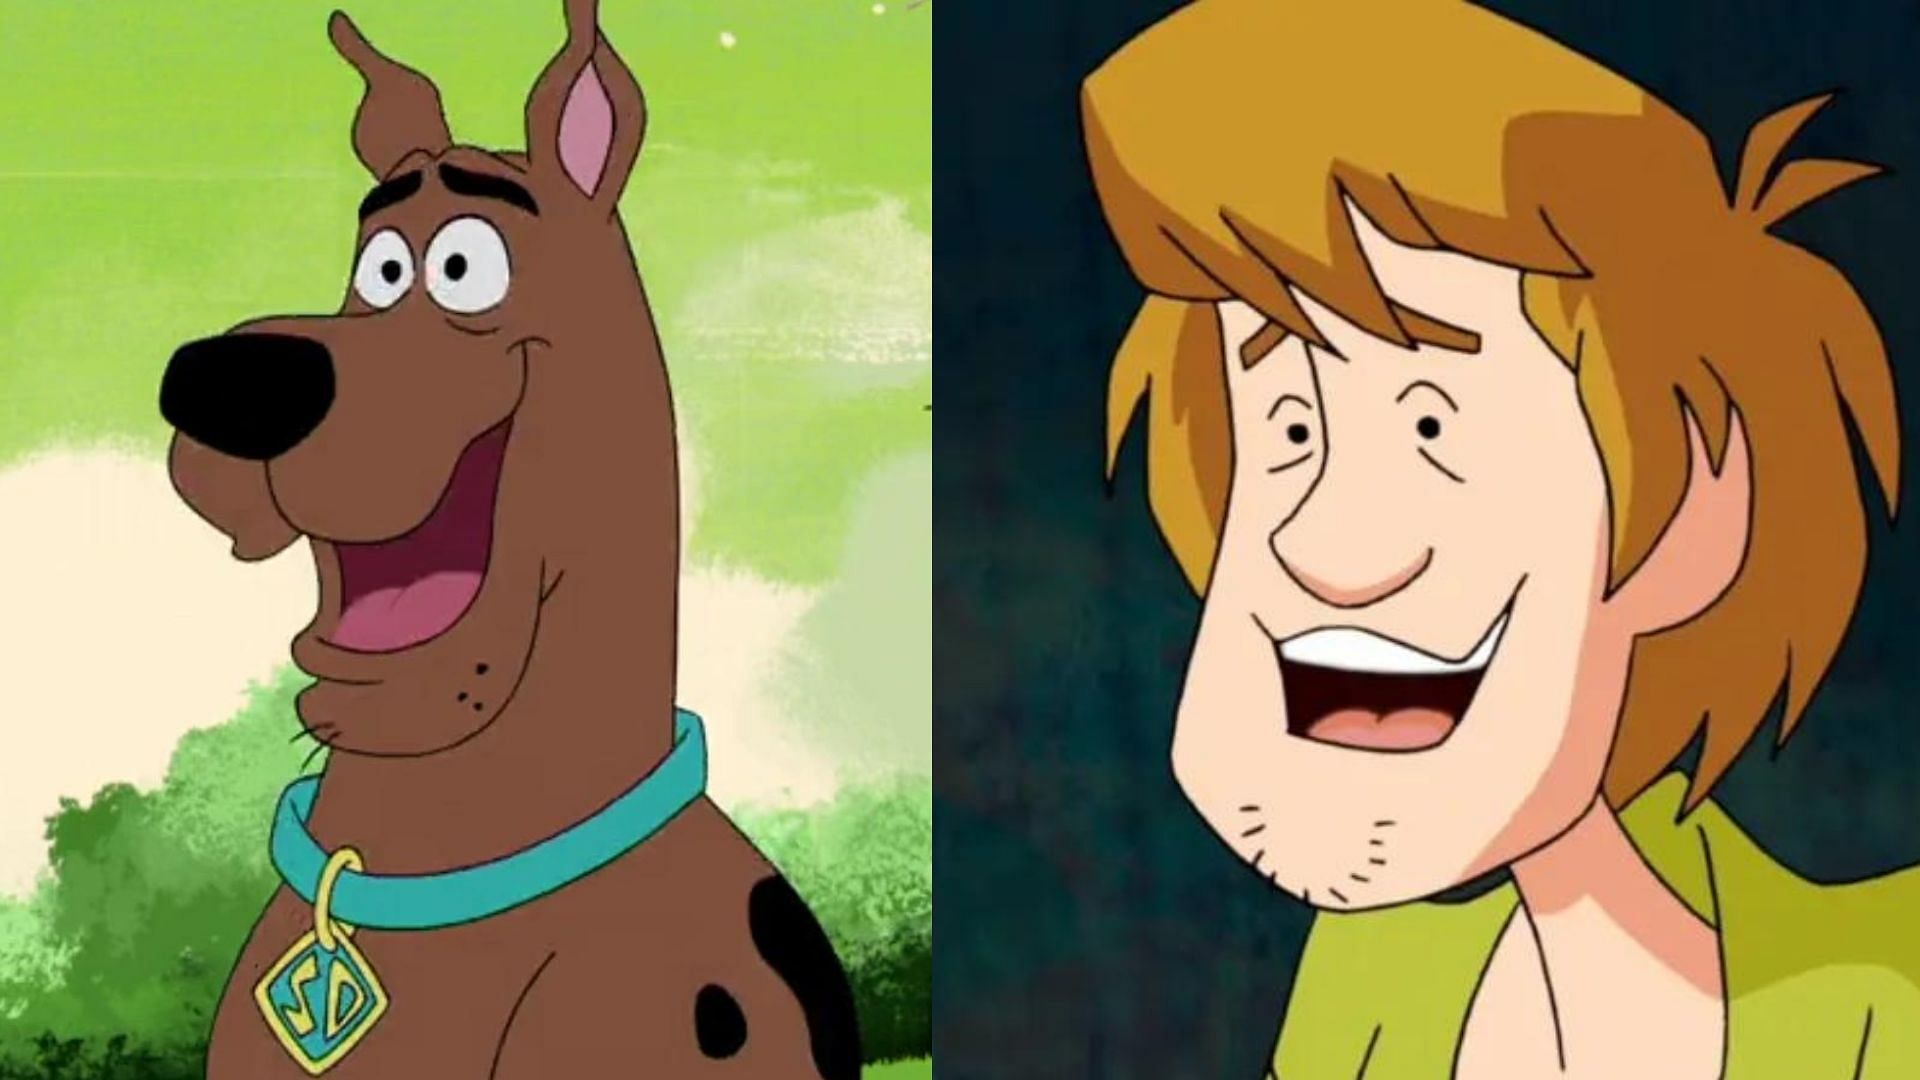 Scooby Doo and Shaggy (images via WB Animation)